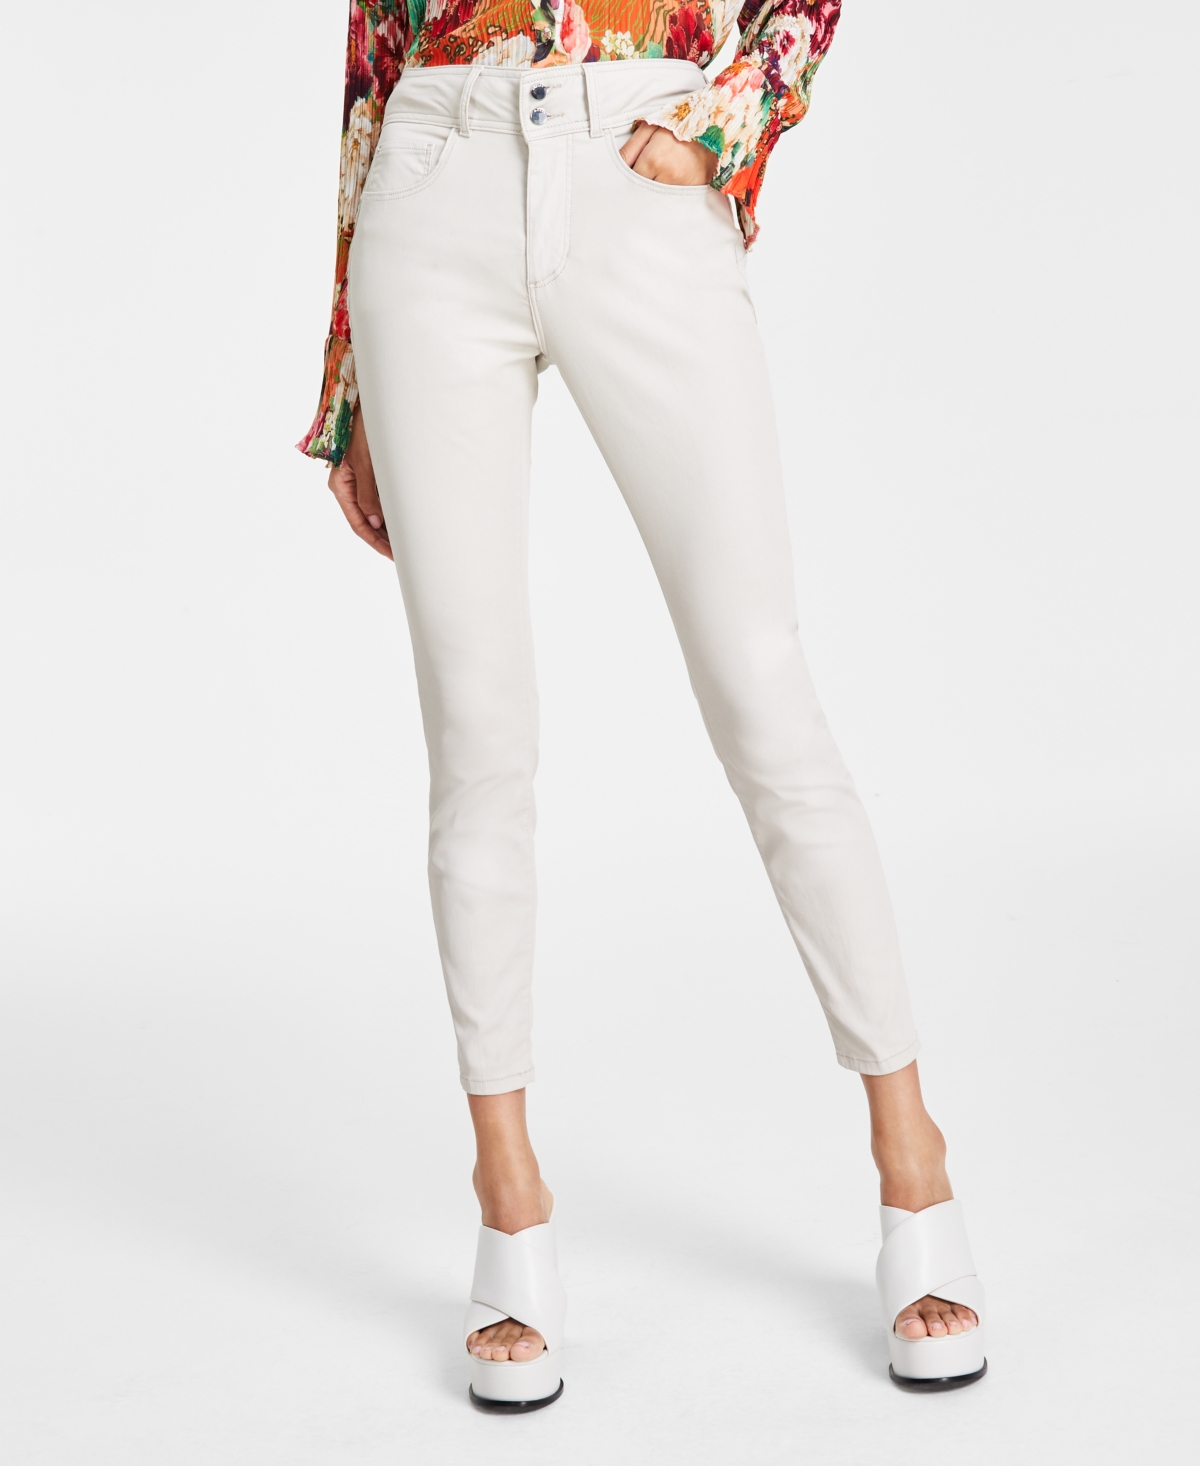 GUESS WOMEN'S SHAPE UP HIGH-RISE SKINNY JEANS